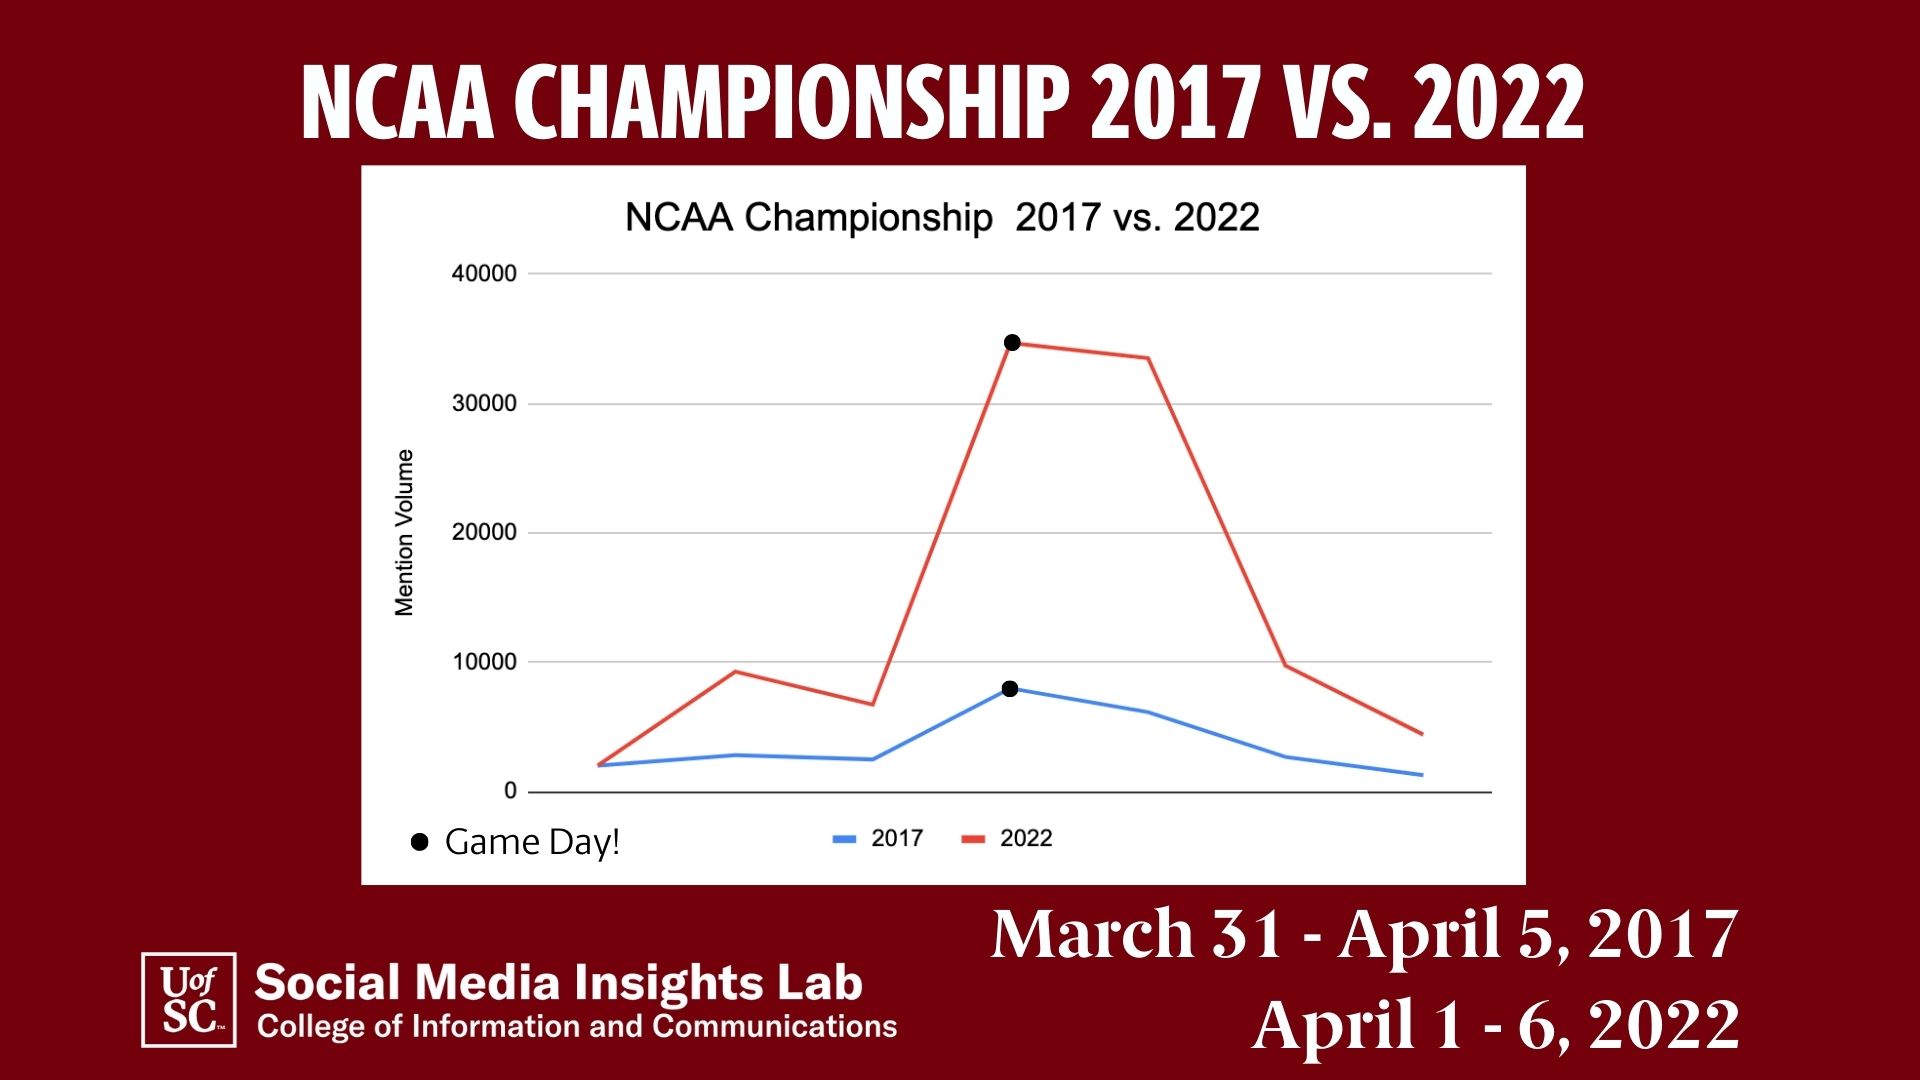 Social media interest in the championship was significantly greater this year than in 2017, when the team won its first national title. 